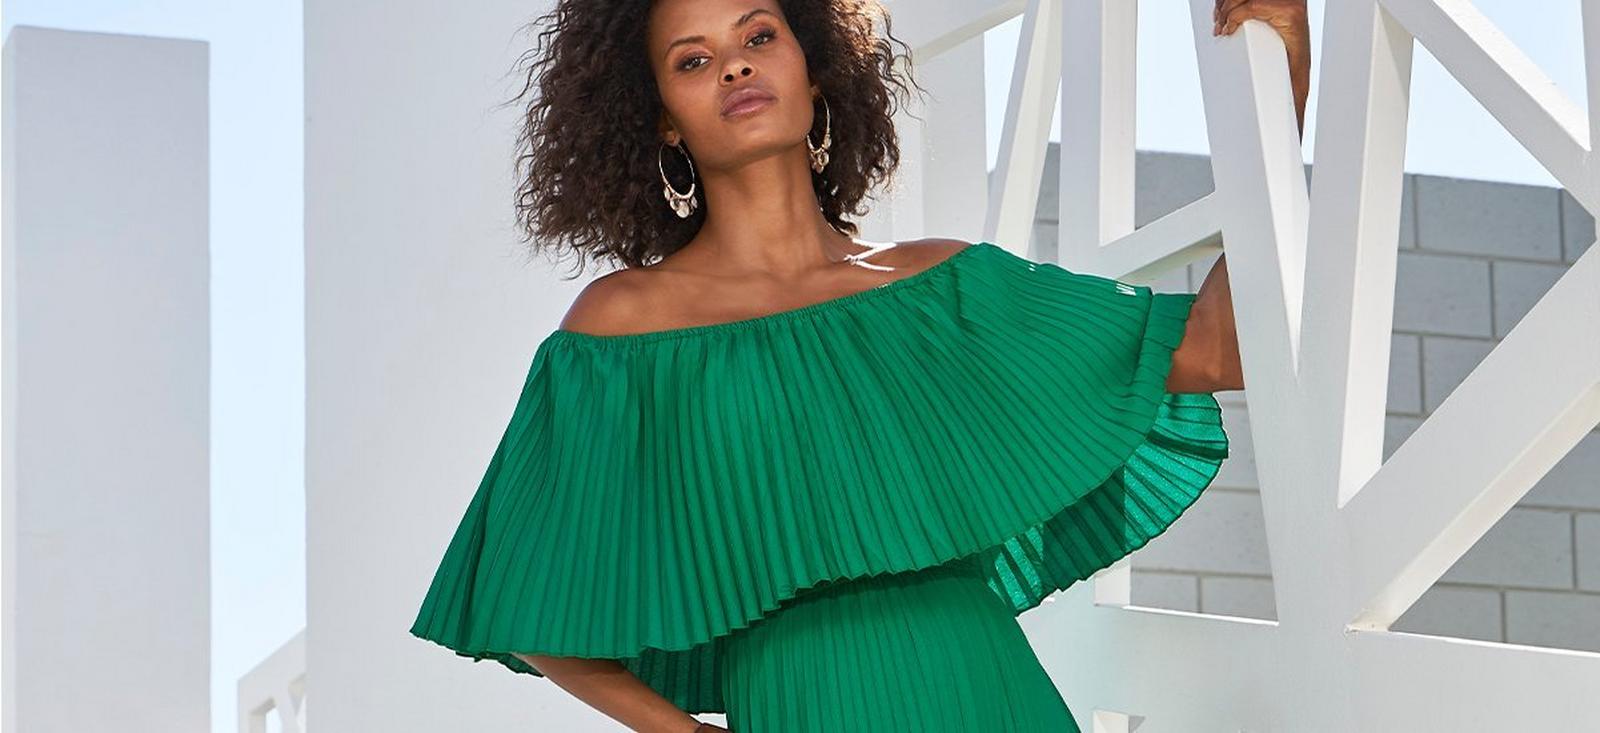 model wearing a green off-the-shoulder pleated maxi dress.